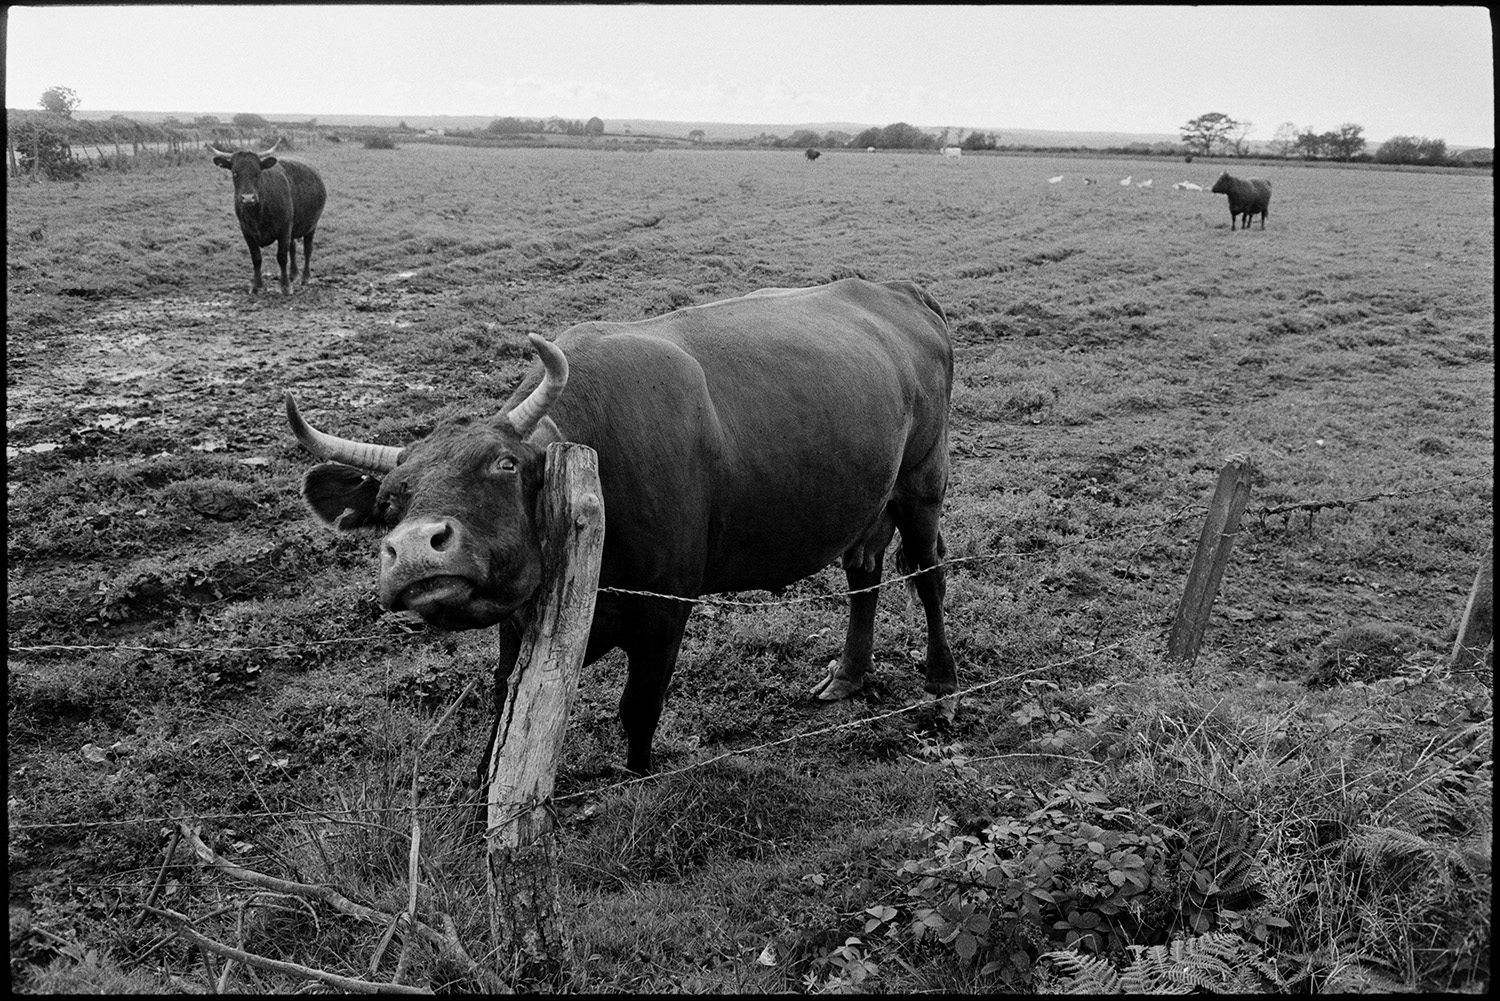 Horned cow on moor. Rubbing its neck on a post.
[Cattle in a field at Cuppers Piece, Beaford. A horned cow in the foreground is rubbing it's neck on a barbed wire fence post.]